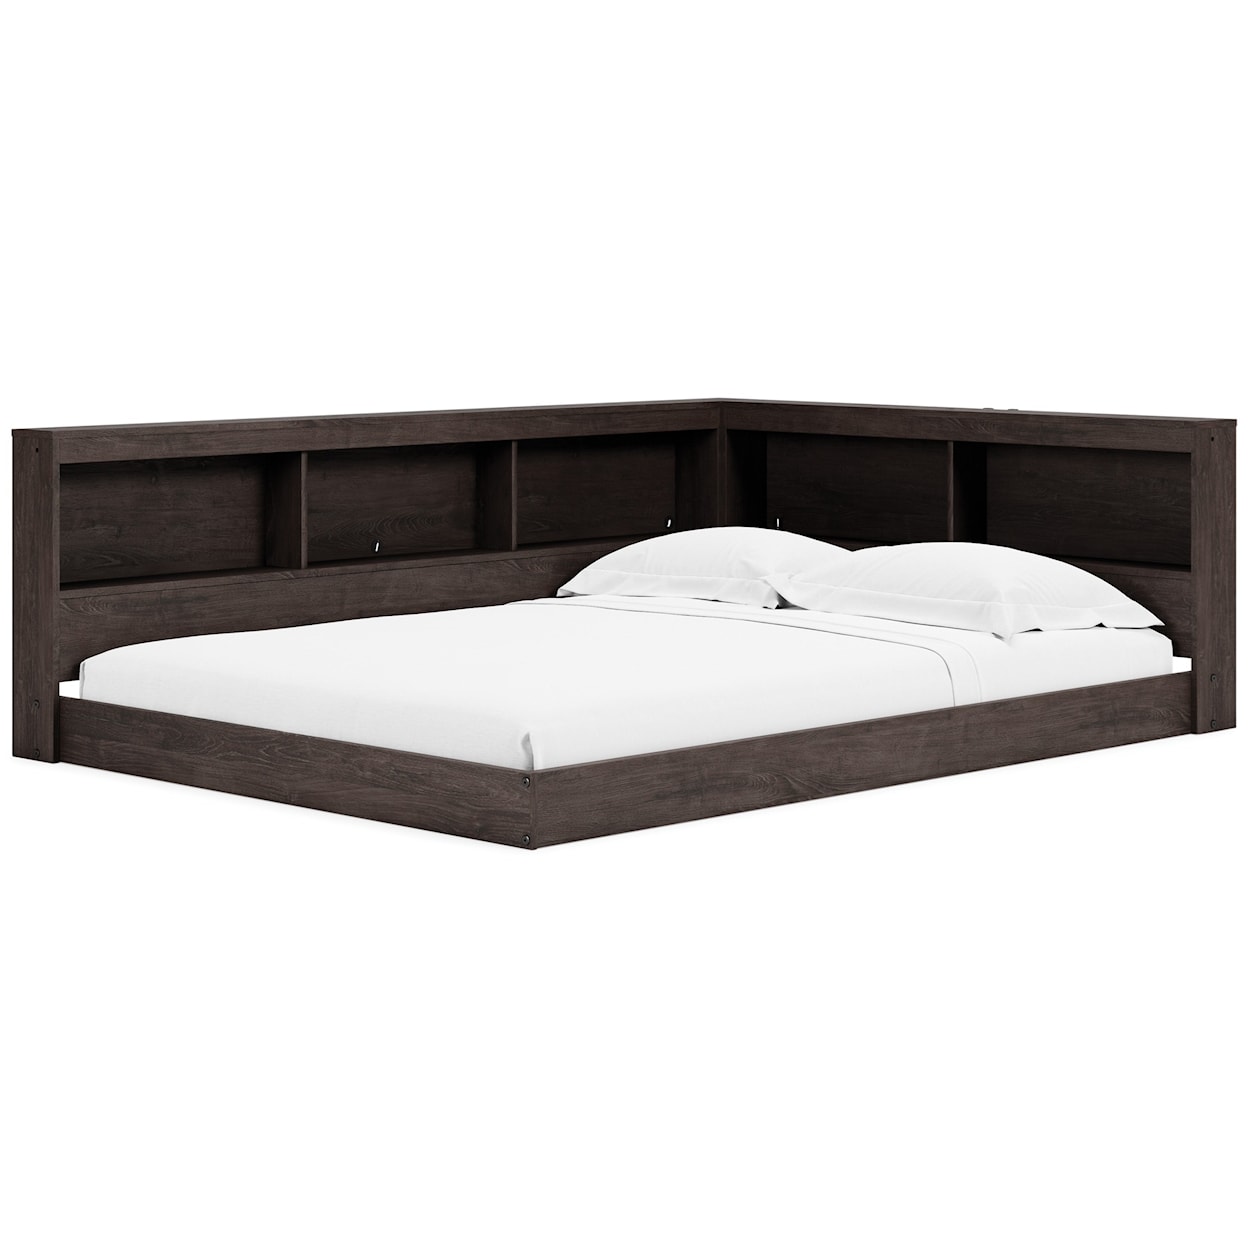 Benchcraft Piperton Full Bookcase Storage Bed